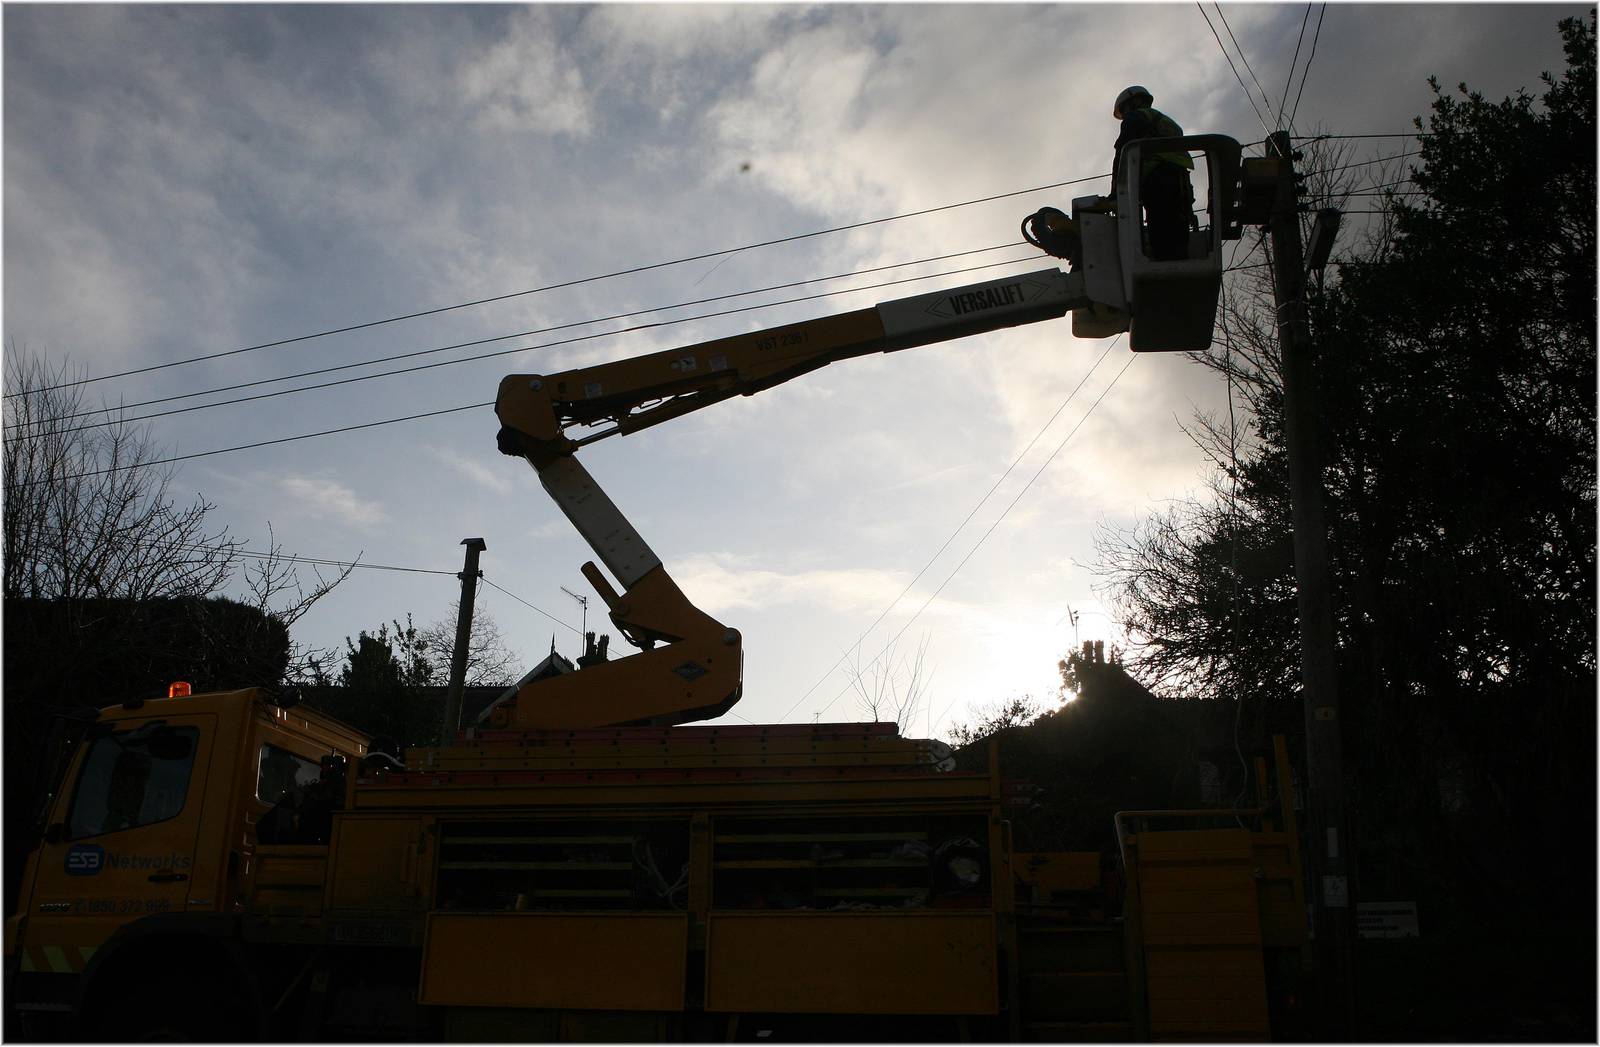 3/1/2012.   - NEWS -
ESB workers repair some lines damaged by a fallen tree during stormy weather, on Nashville Road, Howth, Co. Dublin on Tuesday.
Photographer: Dara Mac Dónaill / THE IRISH TIMES 










Photographer: Dara Mac Donaill / THE IRISH TIMES